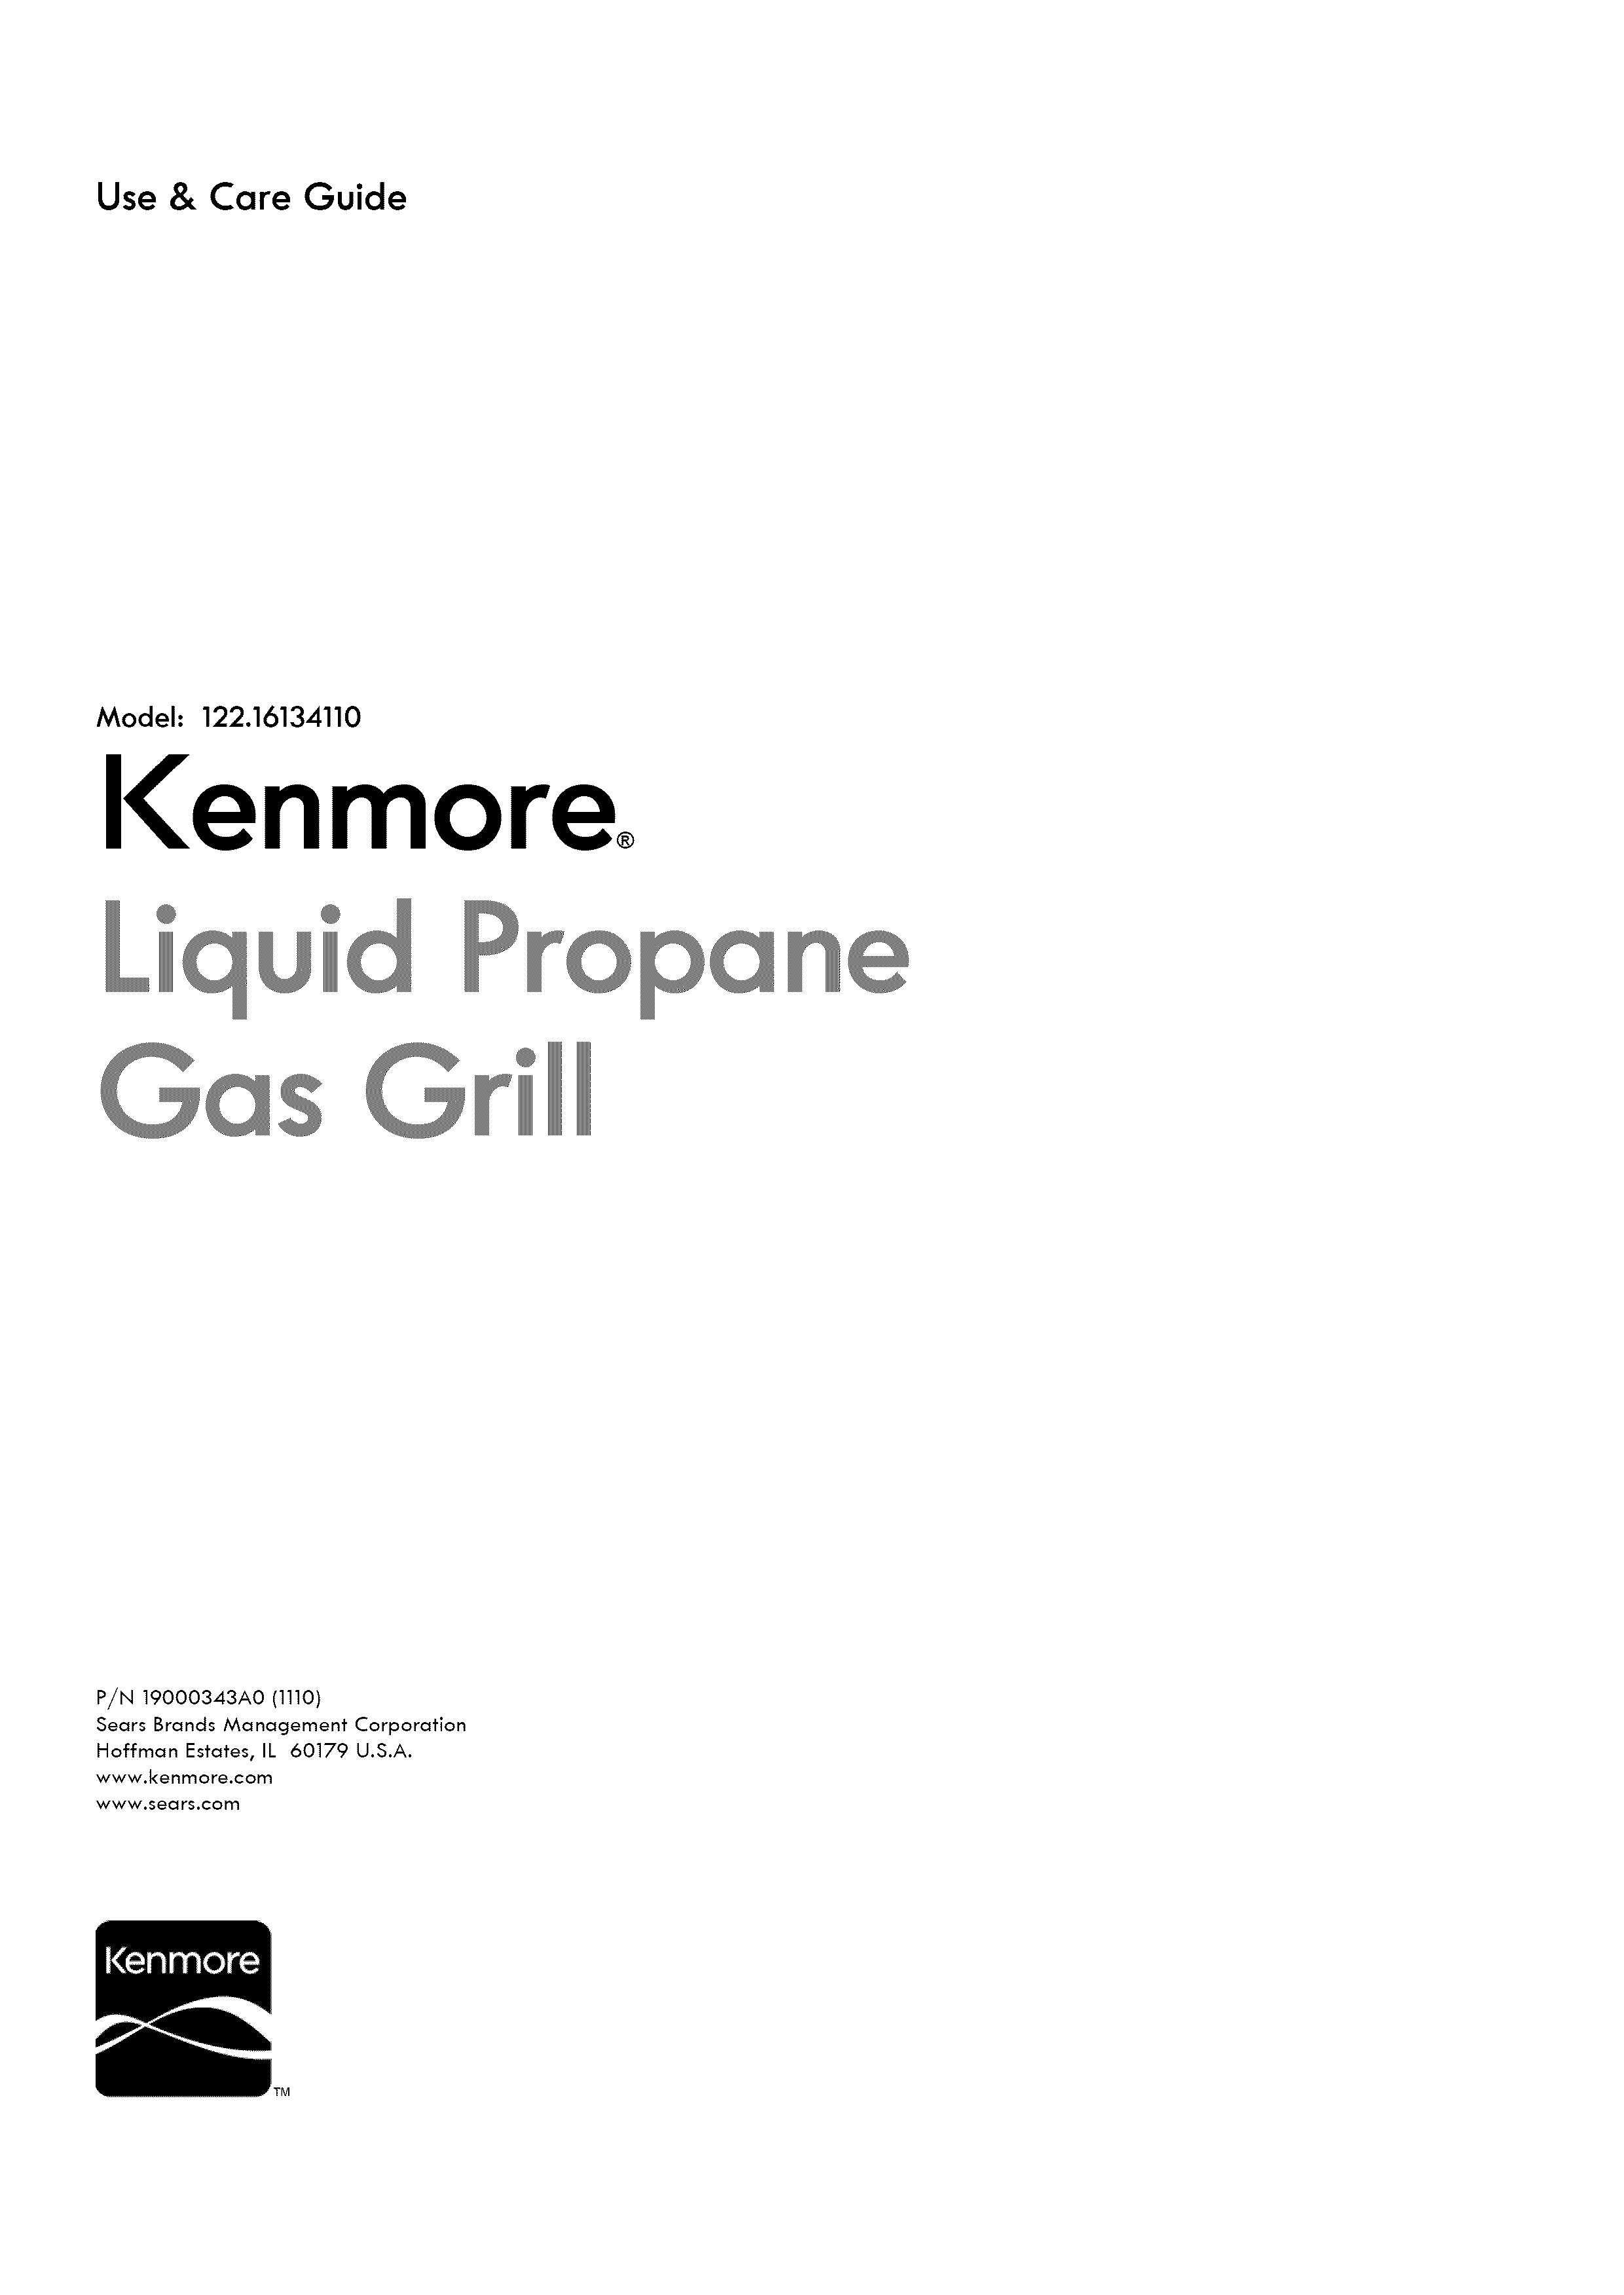 Kenmore 122.1613411 Gas Grill User Manual